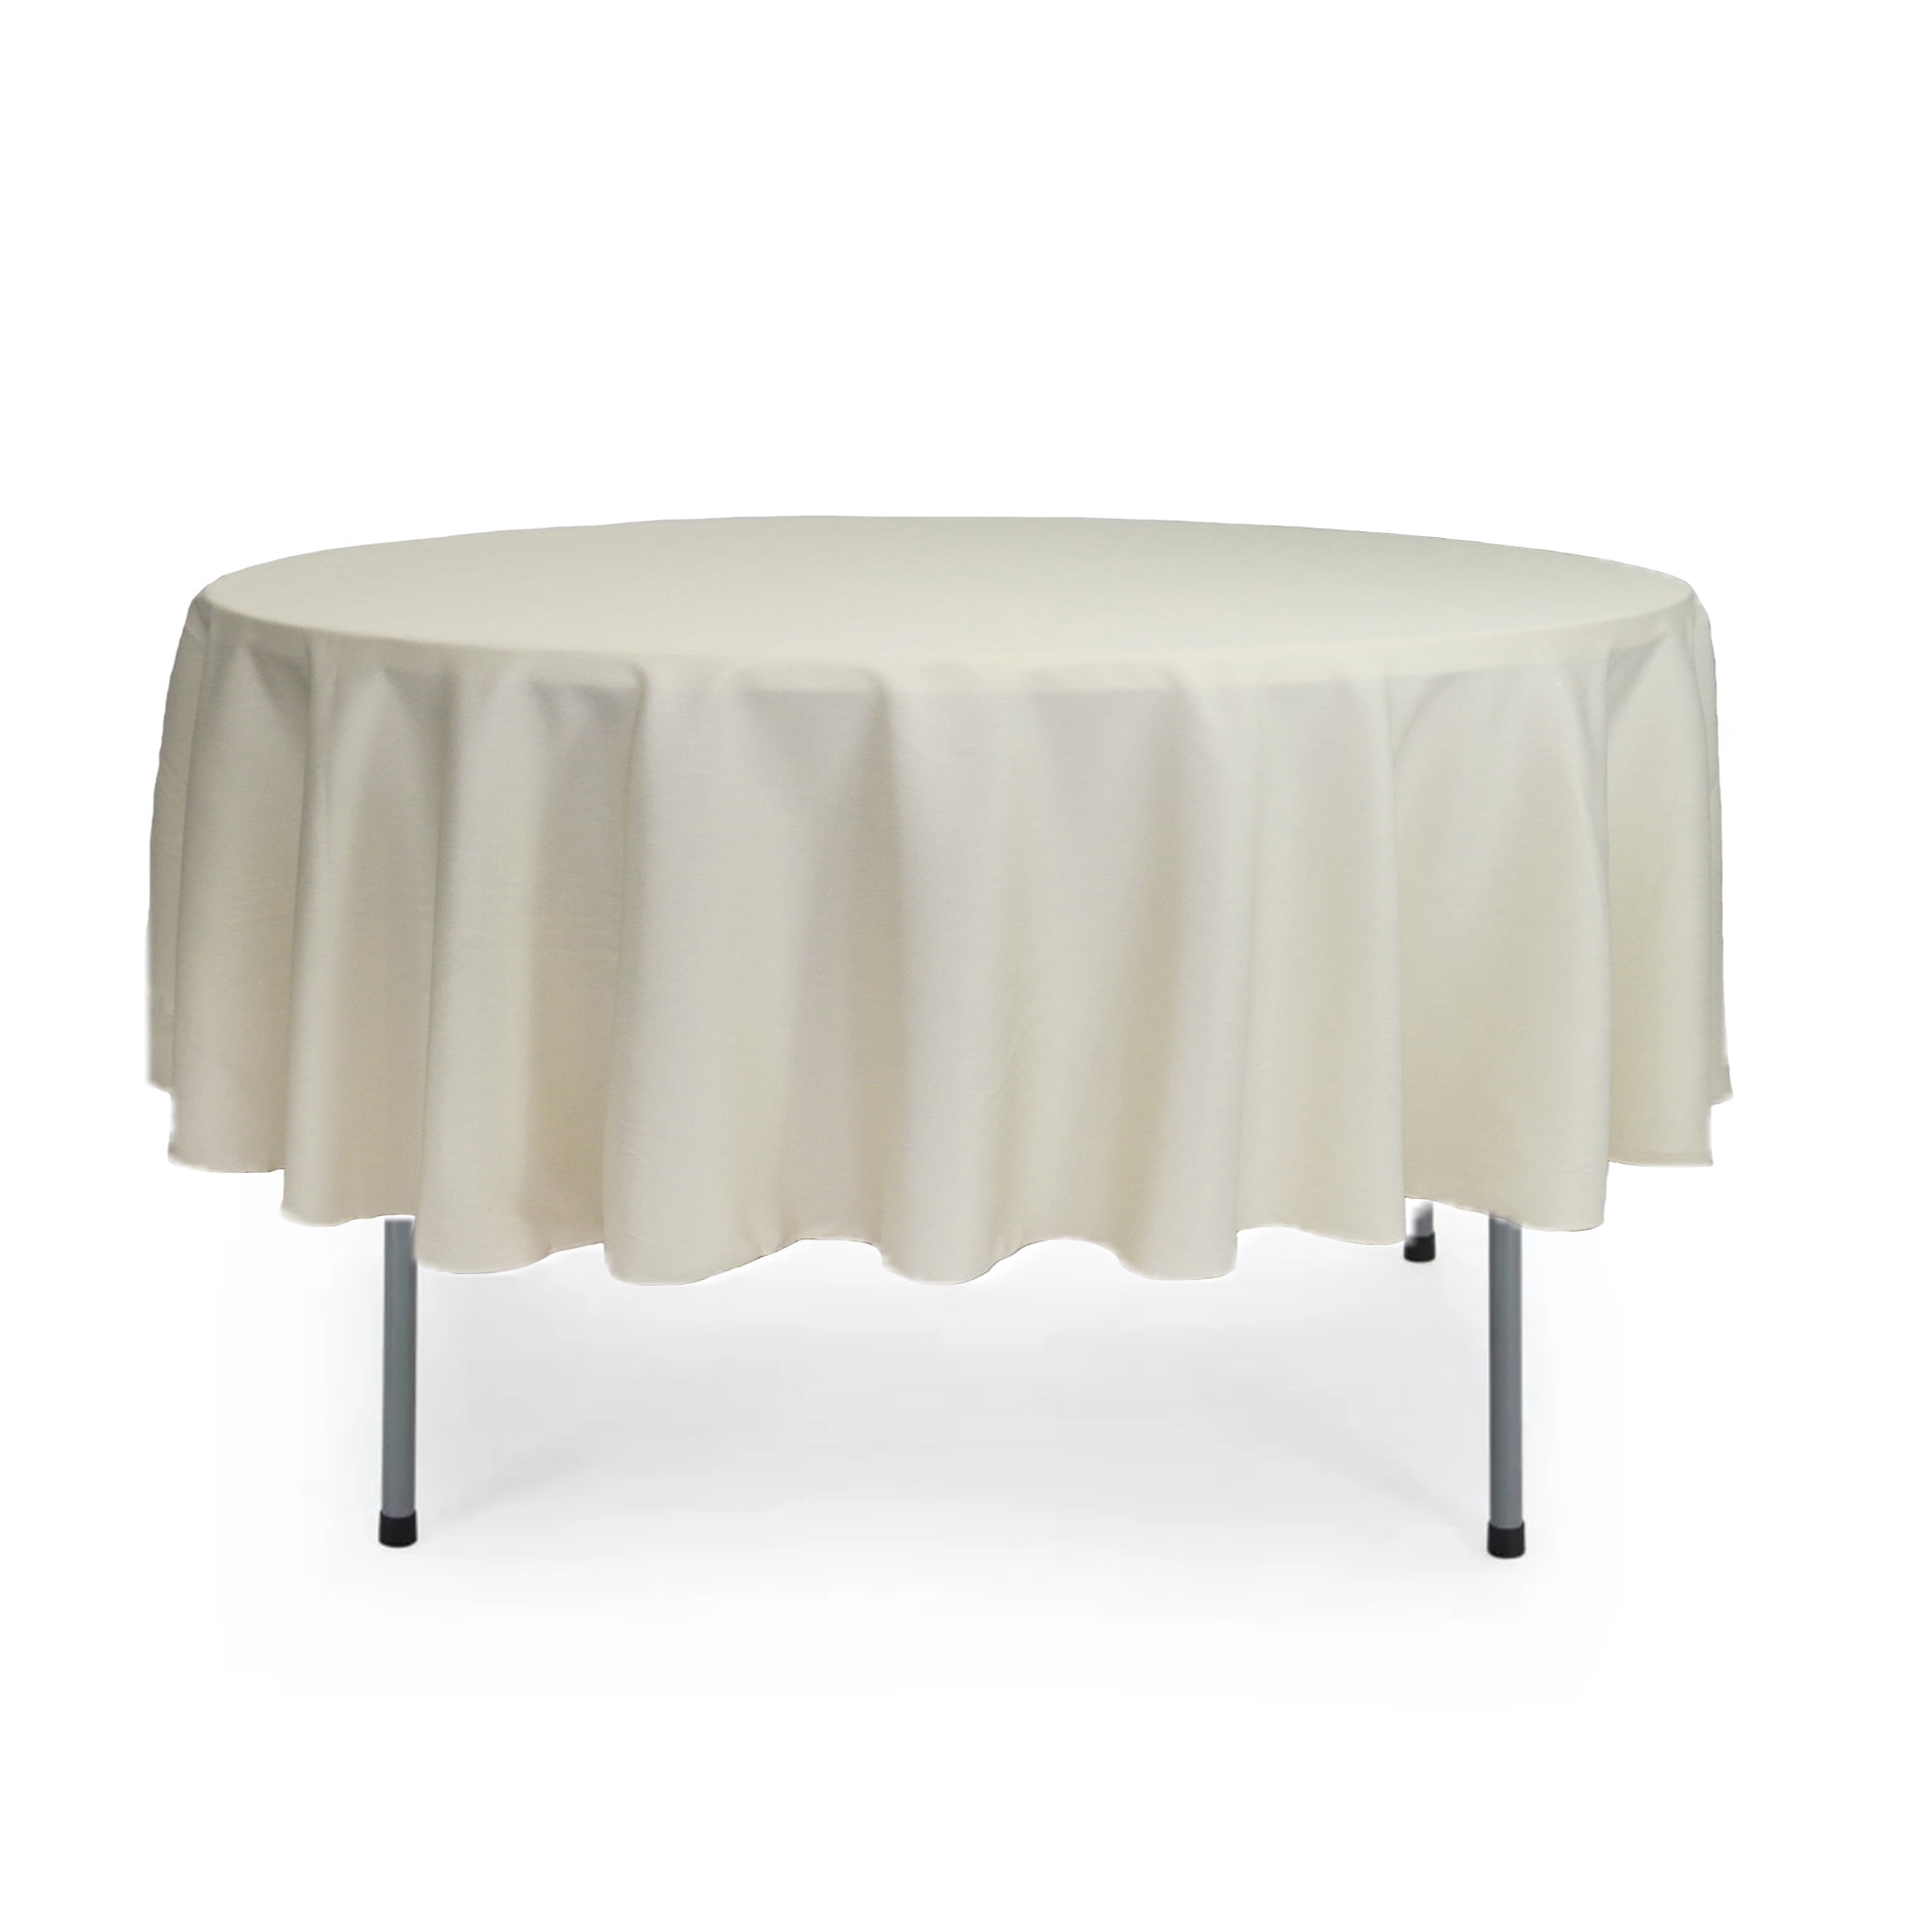 Your Chair Covers 90 Inch Round, How Big Is A 90 Inch Round Tablecloth Fit